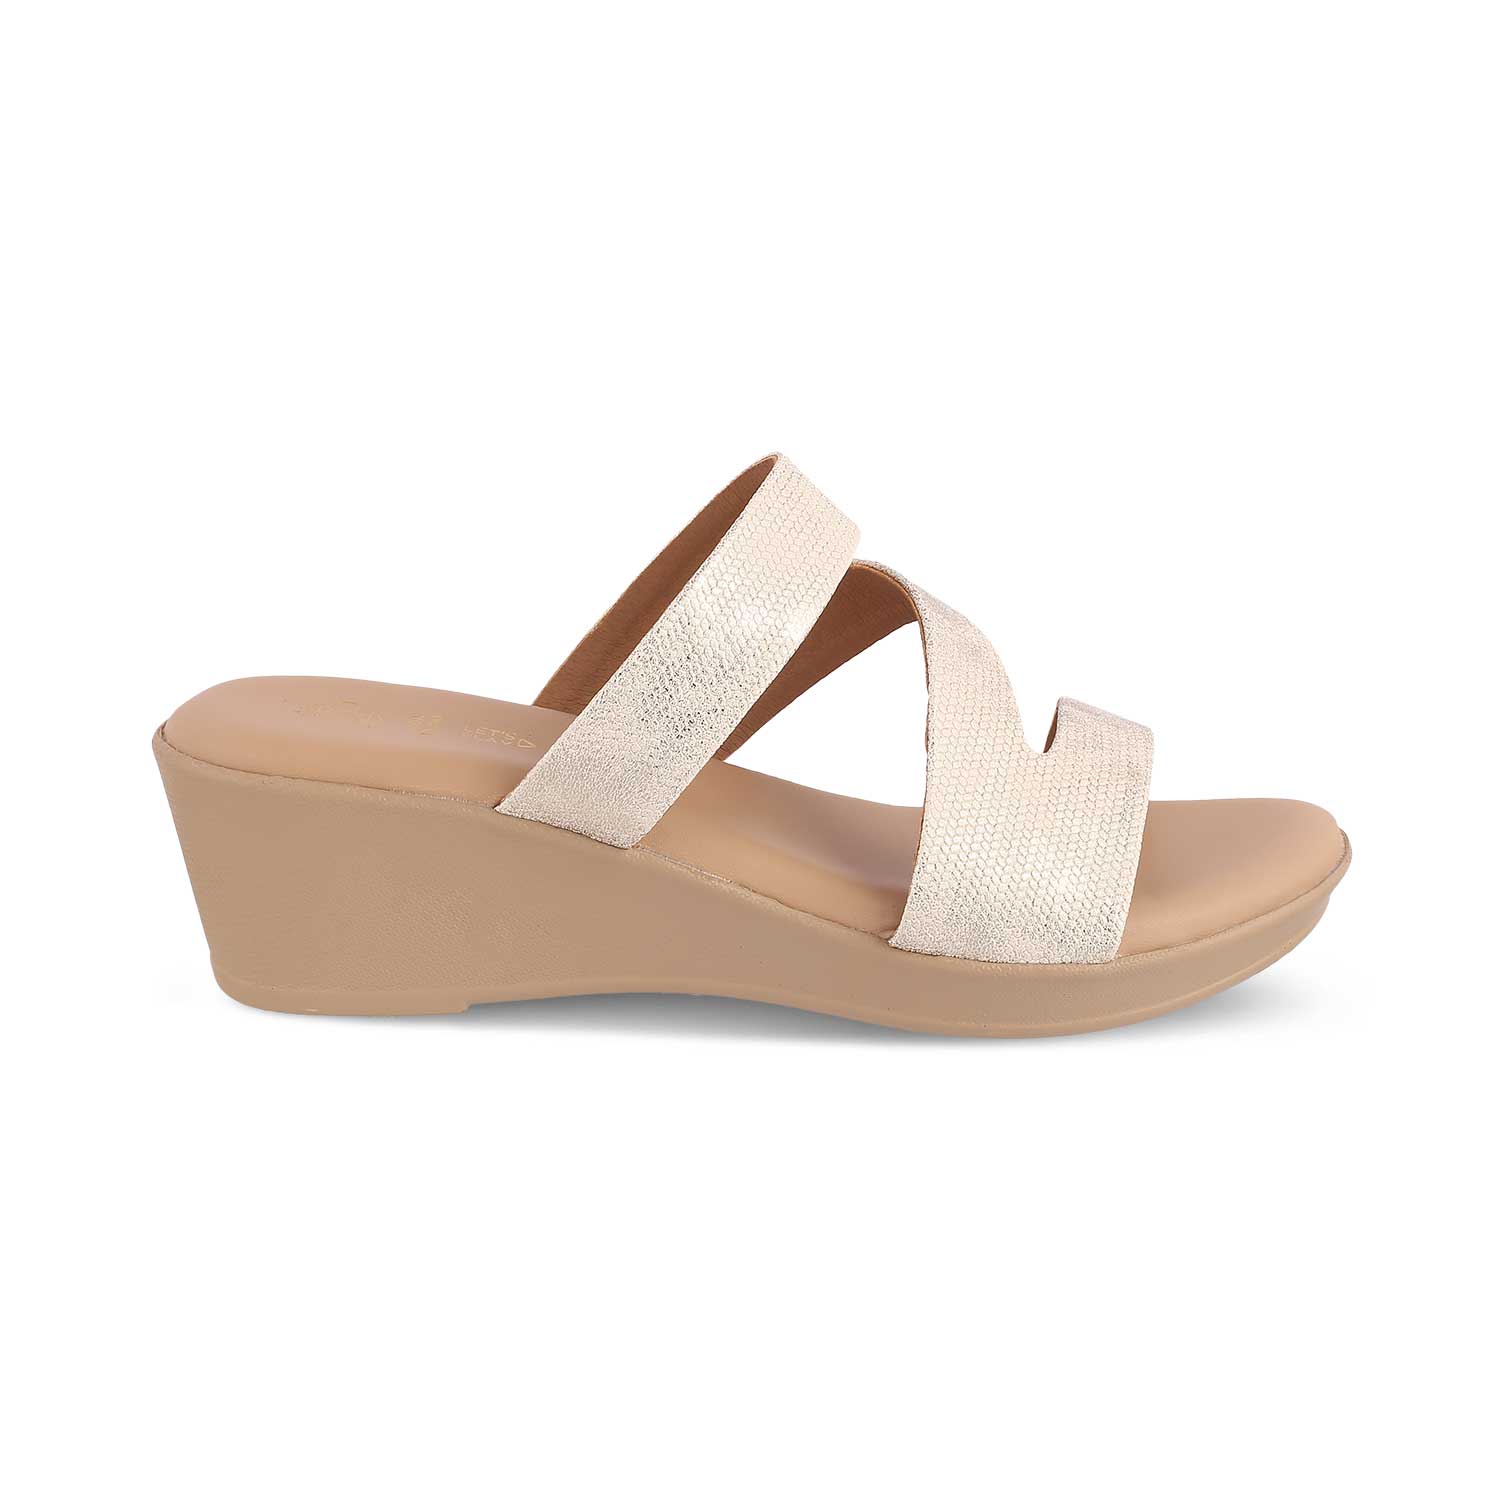 The Snike Gold Women's Dress Wedge Sandals Tresmode